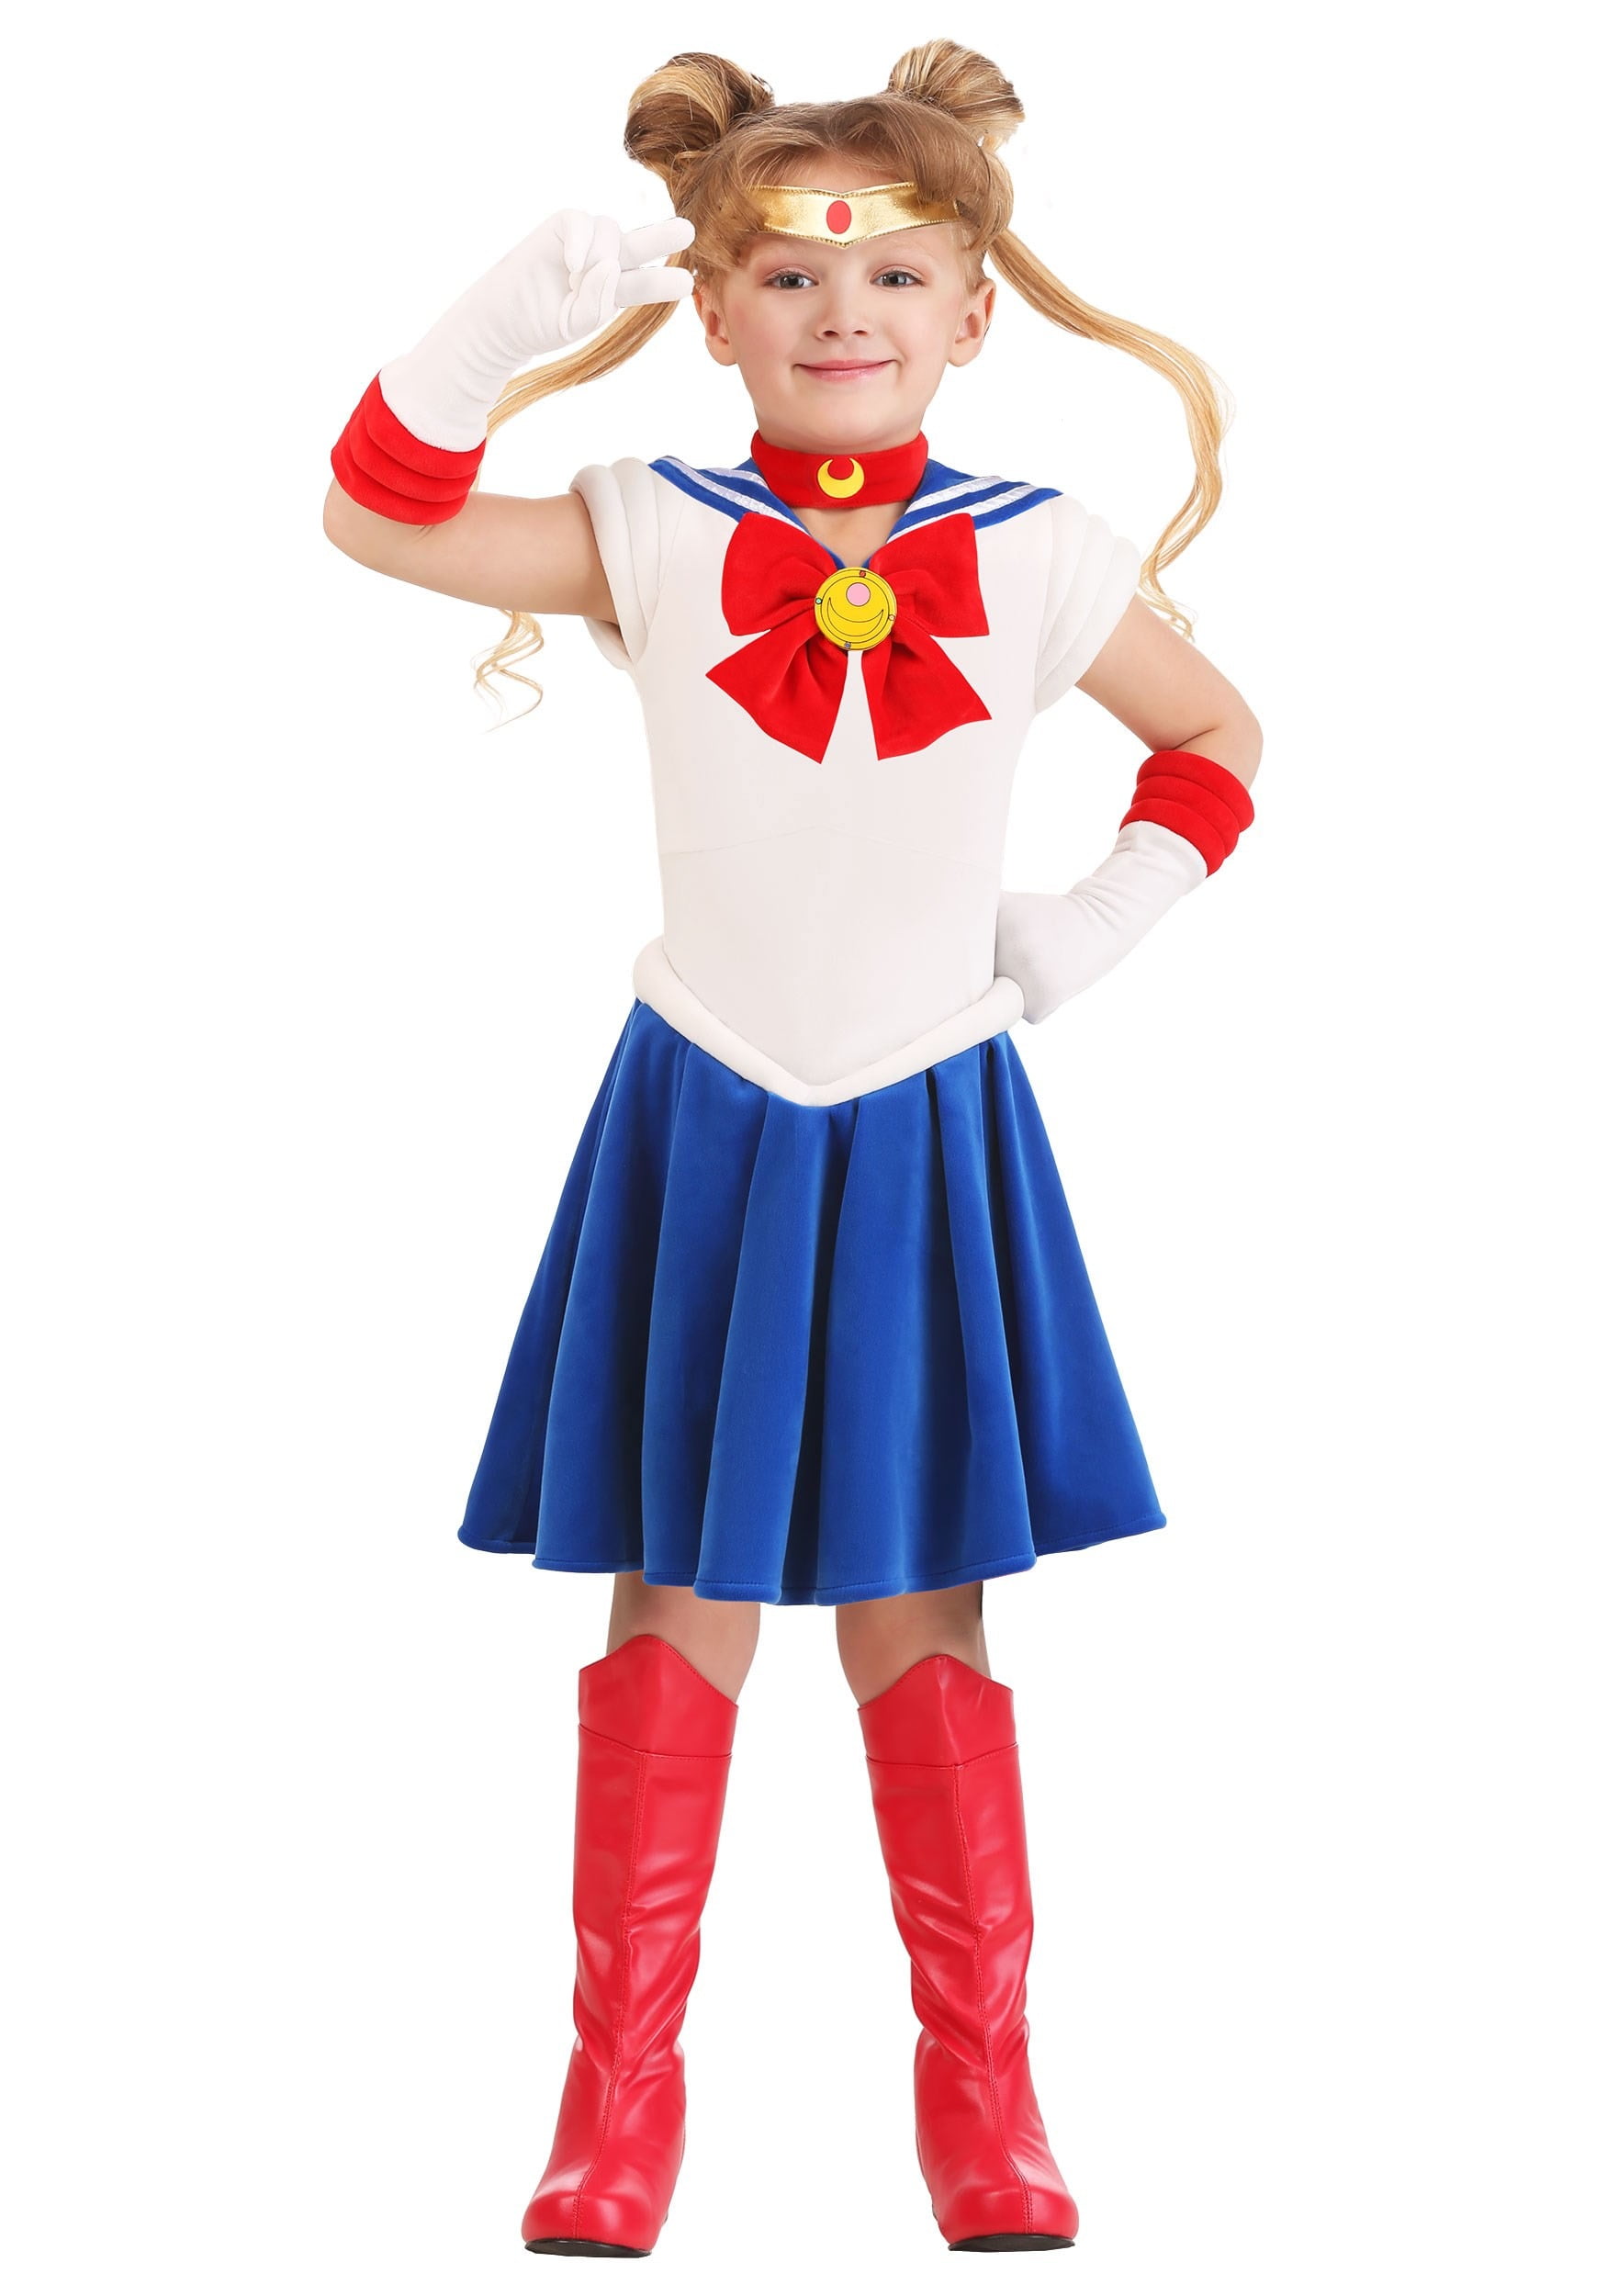 Sailor Moon Costume Cosplay Uniform Fancy Dress Up Fantasy Outfit & Gloves